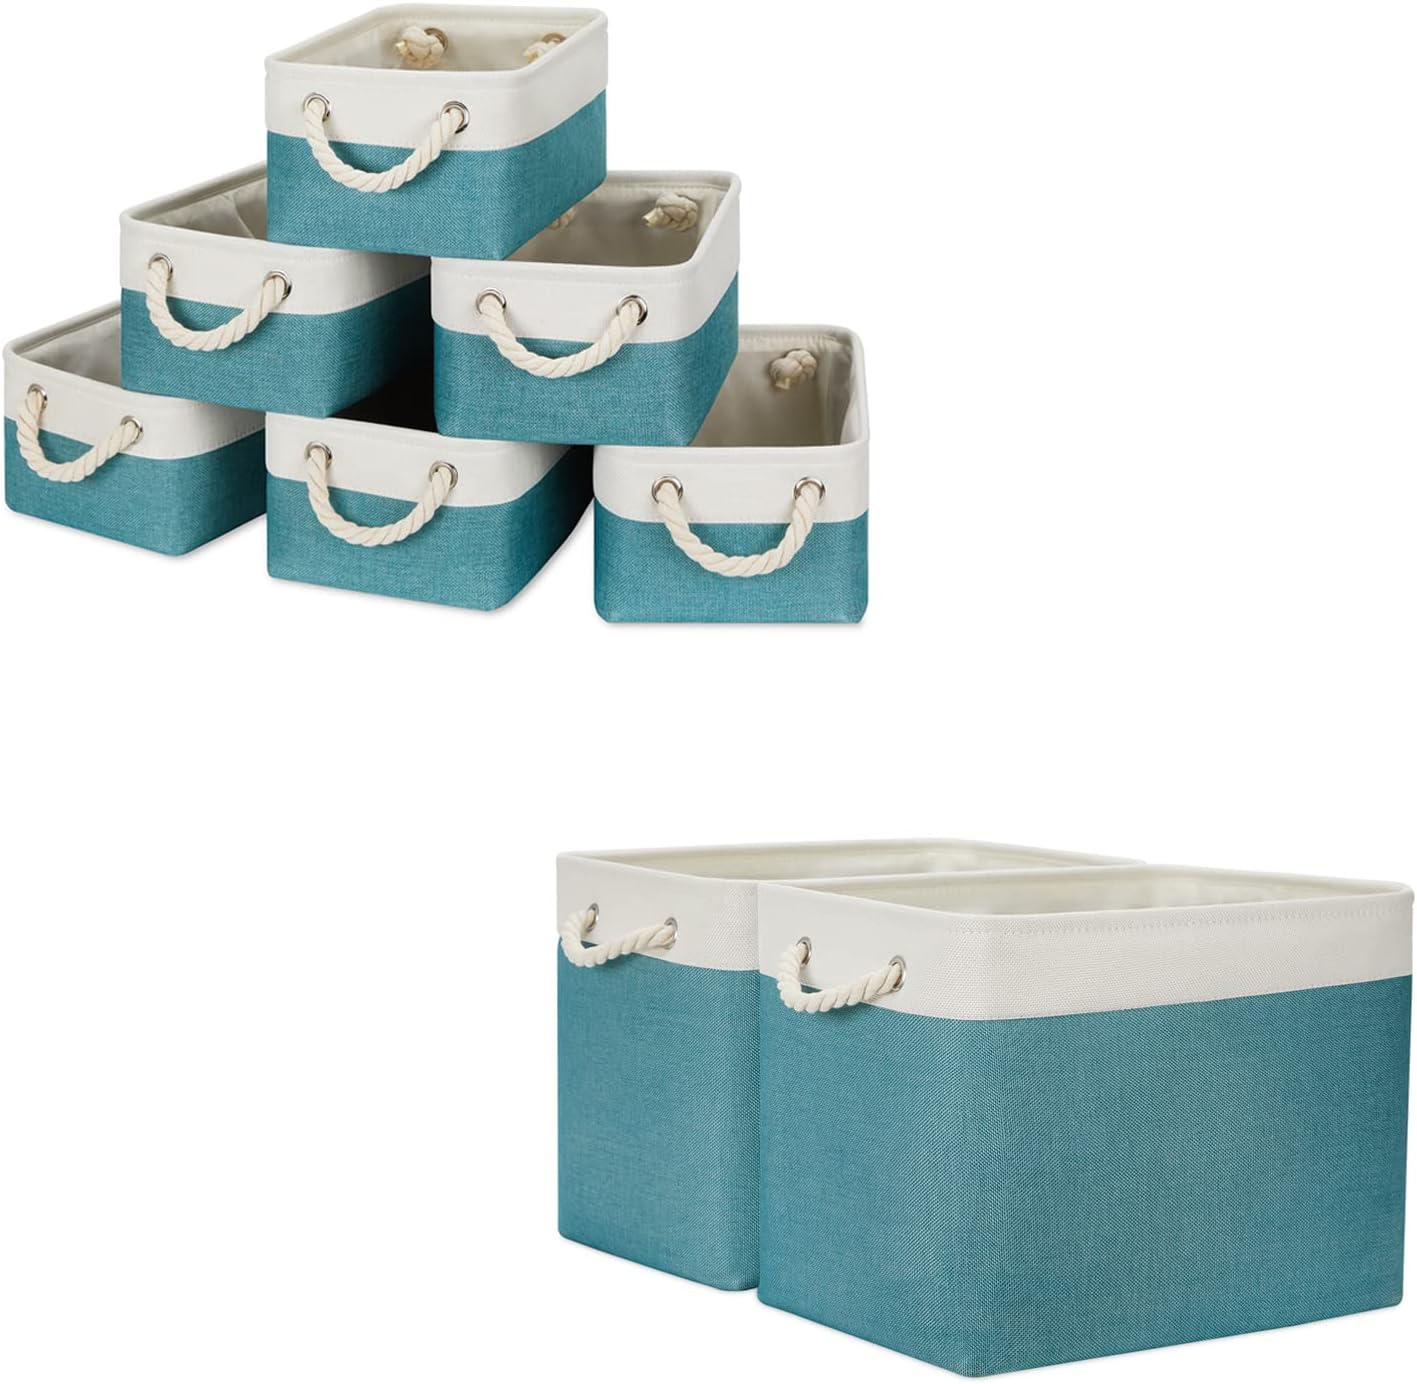 Temary Collapsible Storage Bins Set of 6 Fabric Storage Baskets 2 Pcs Decorative Baskets for Gifts Empty (White&Teal, 11.8Lx7.9Wx5.3H Inches, 16Lx12Wx12H Inches)